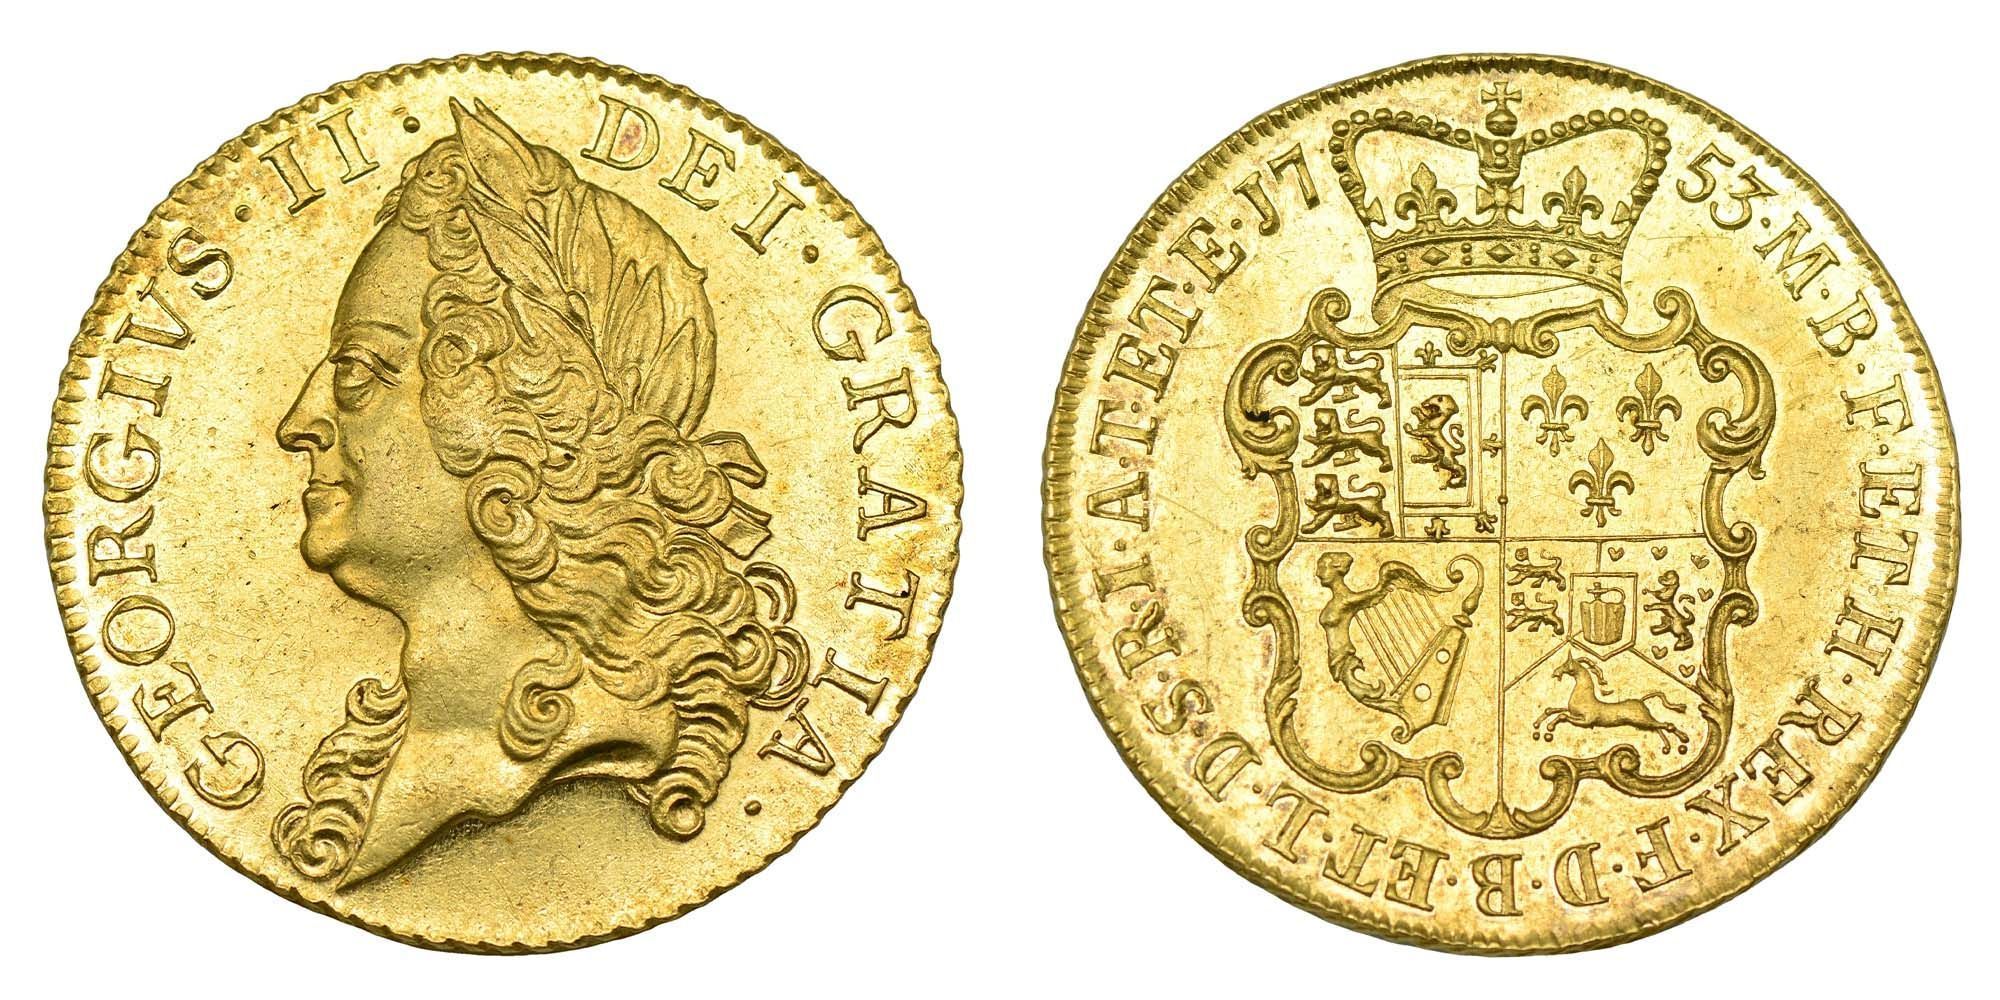 George II Gold Two Guineas 1753 'R2' - Very Rare, the key date for this series